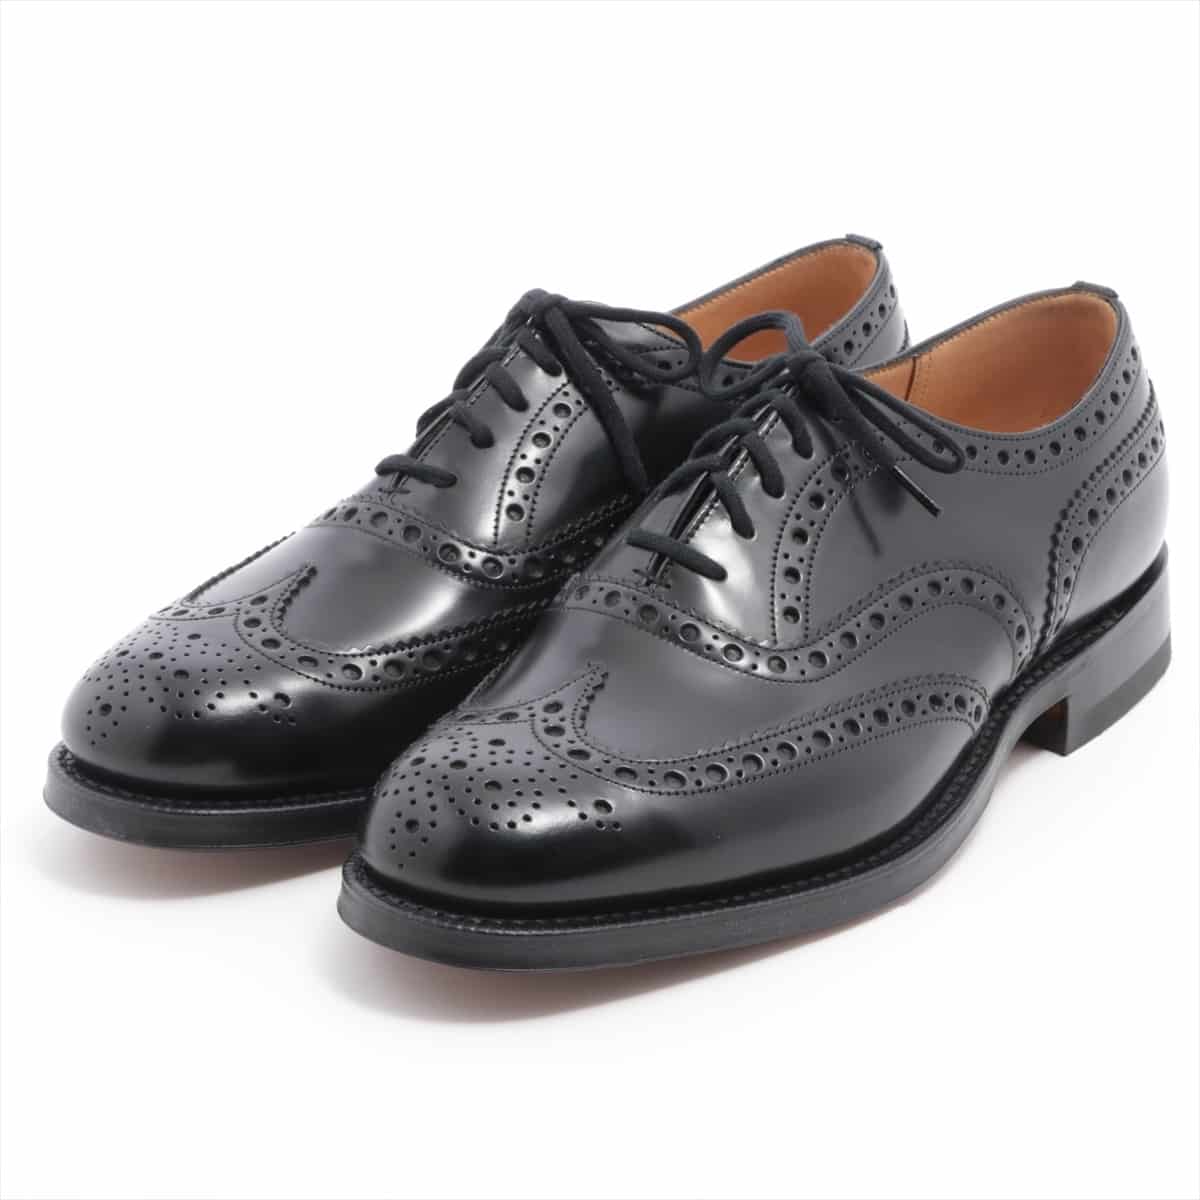 Church's Burwood Leather Leather shoes 60F Men's Black wingtip